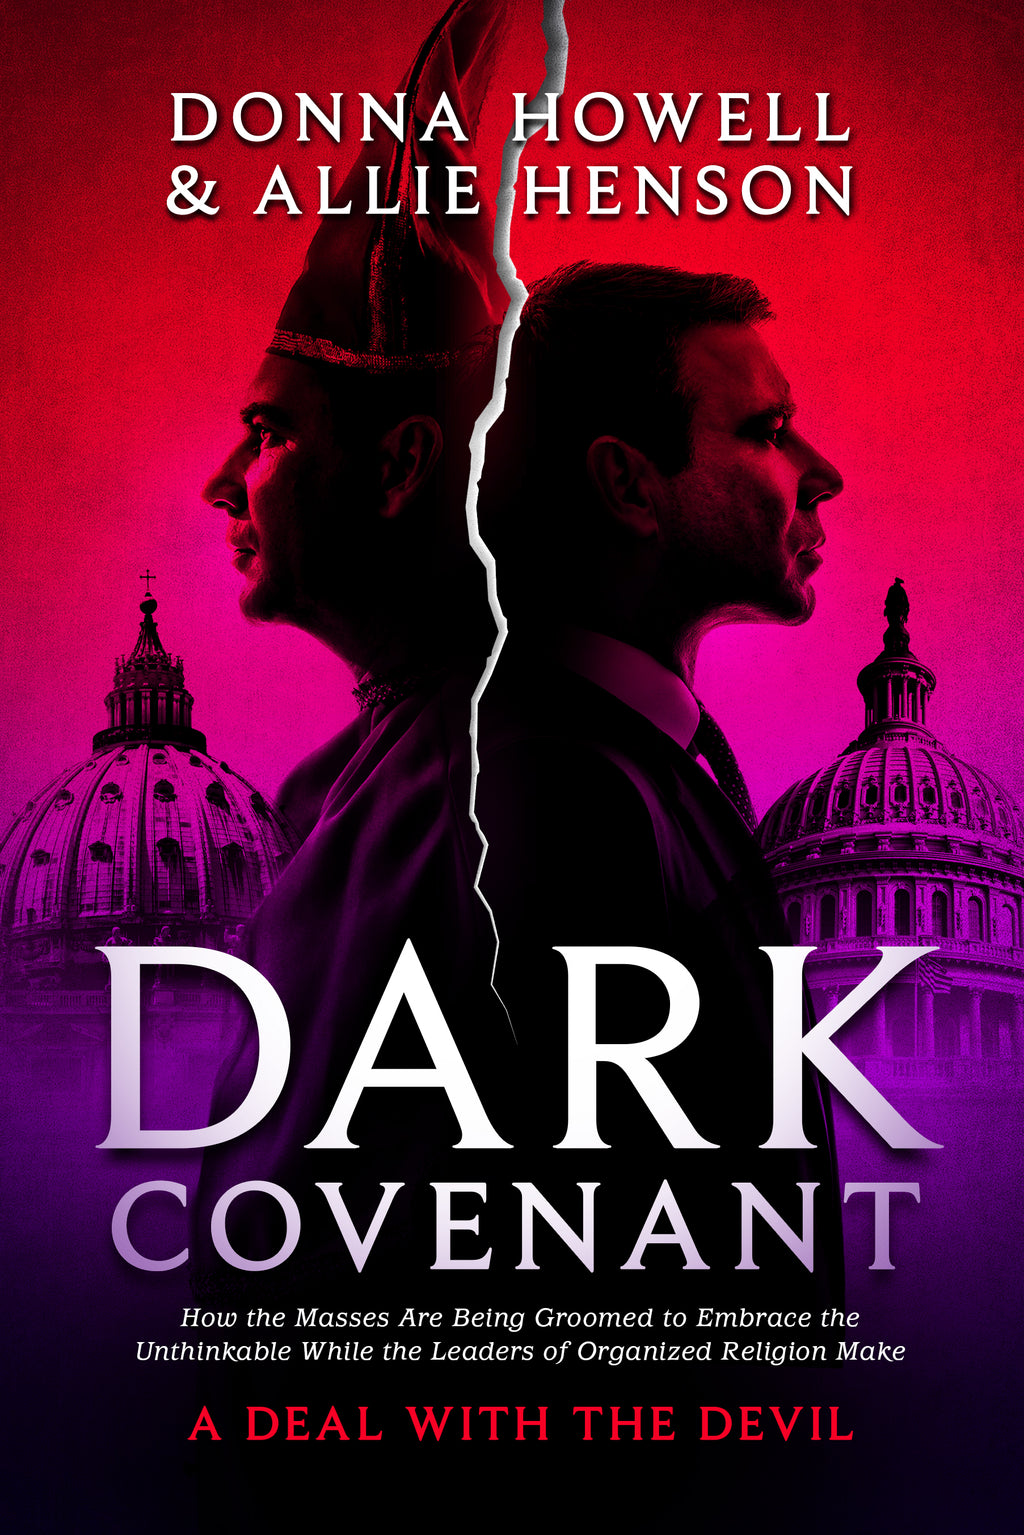 Dark Covenant:  How the Masses are Being Groomed to Embrace the Unthinkable While the Leaders of Organized Religion Make A DEAL WITH THE DEVIL